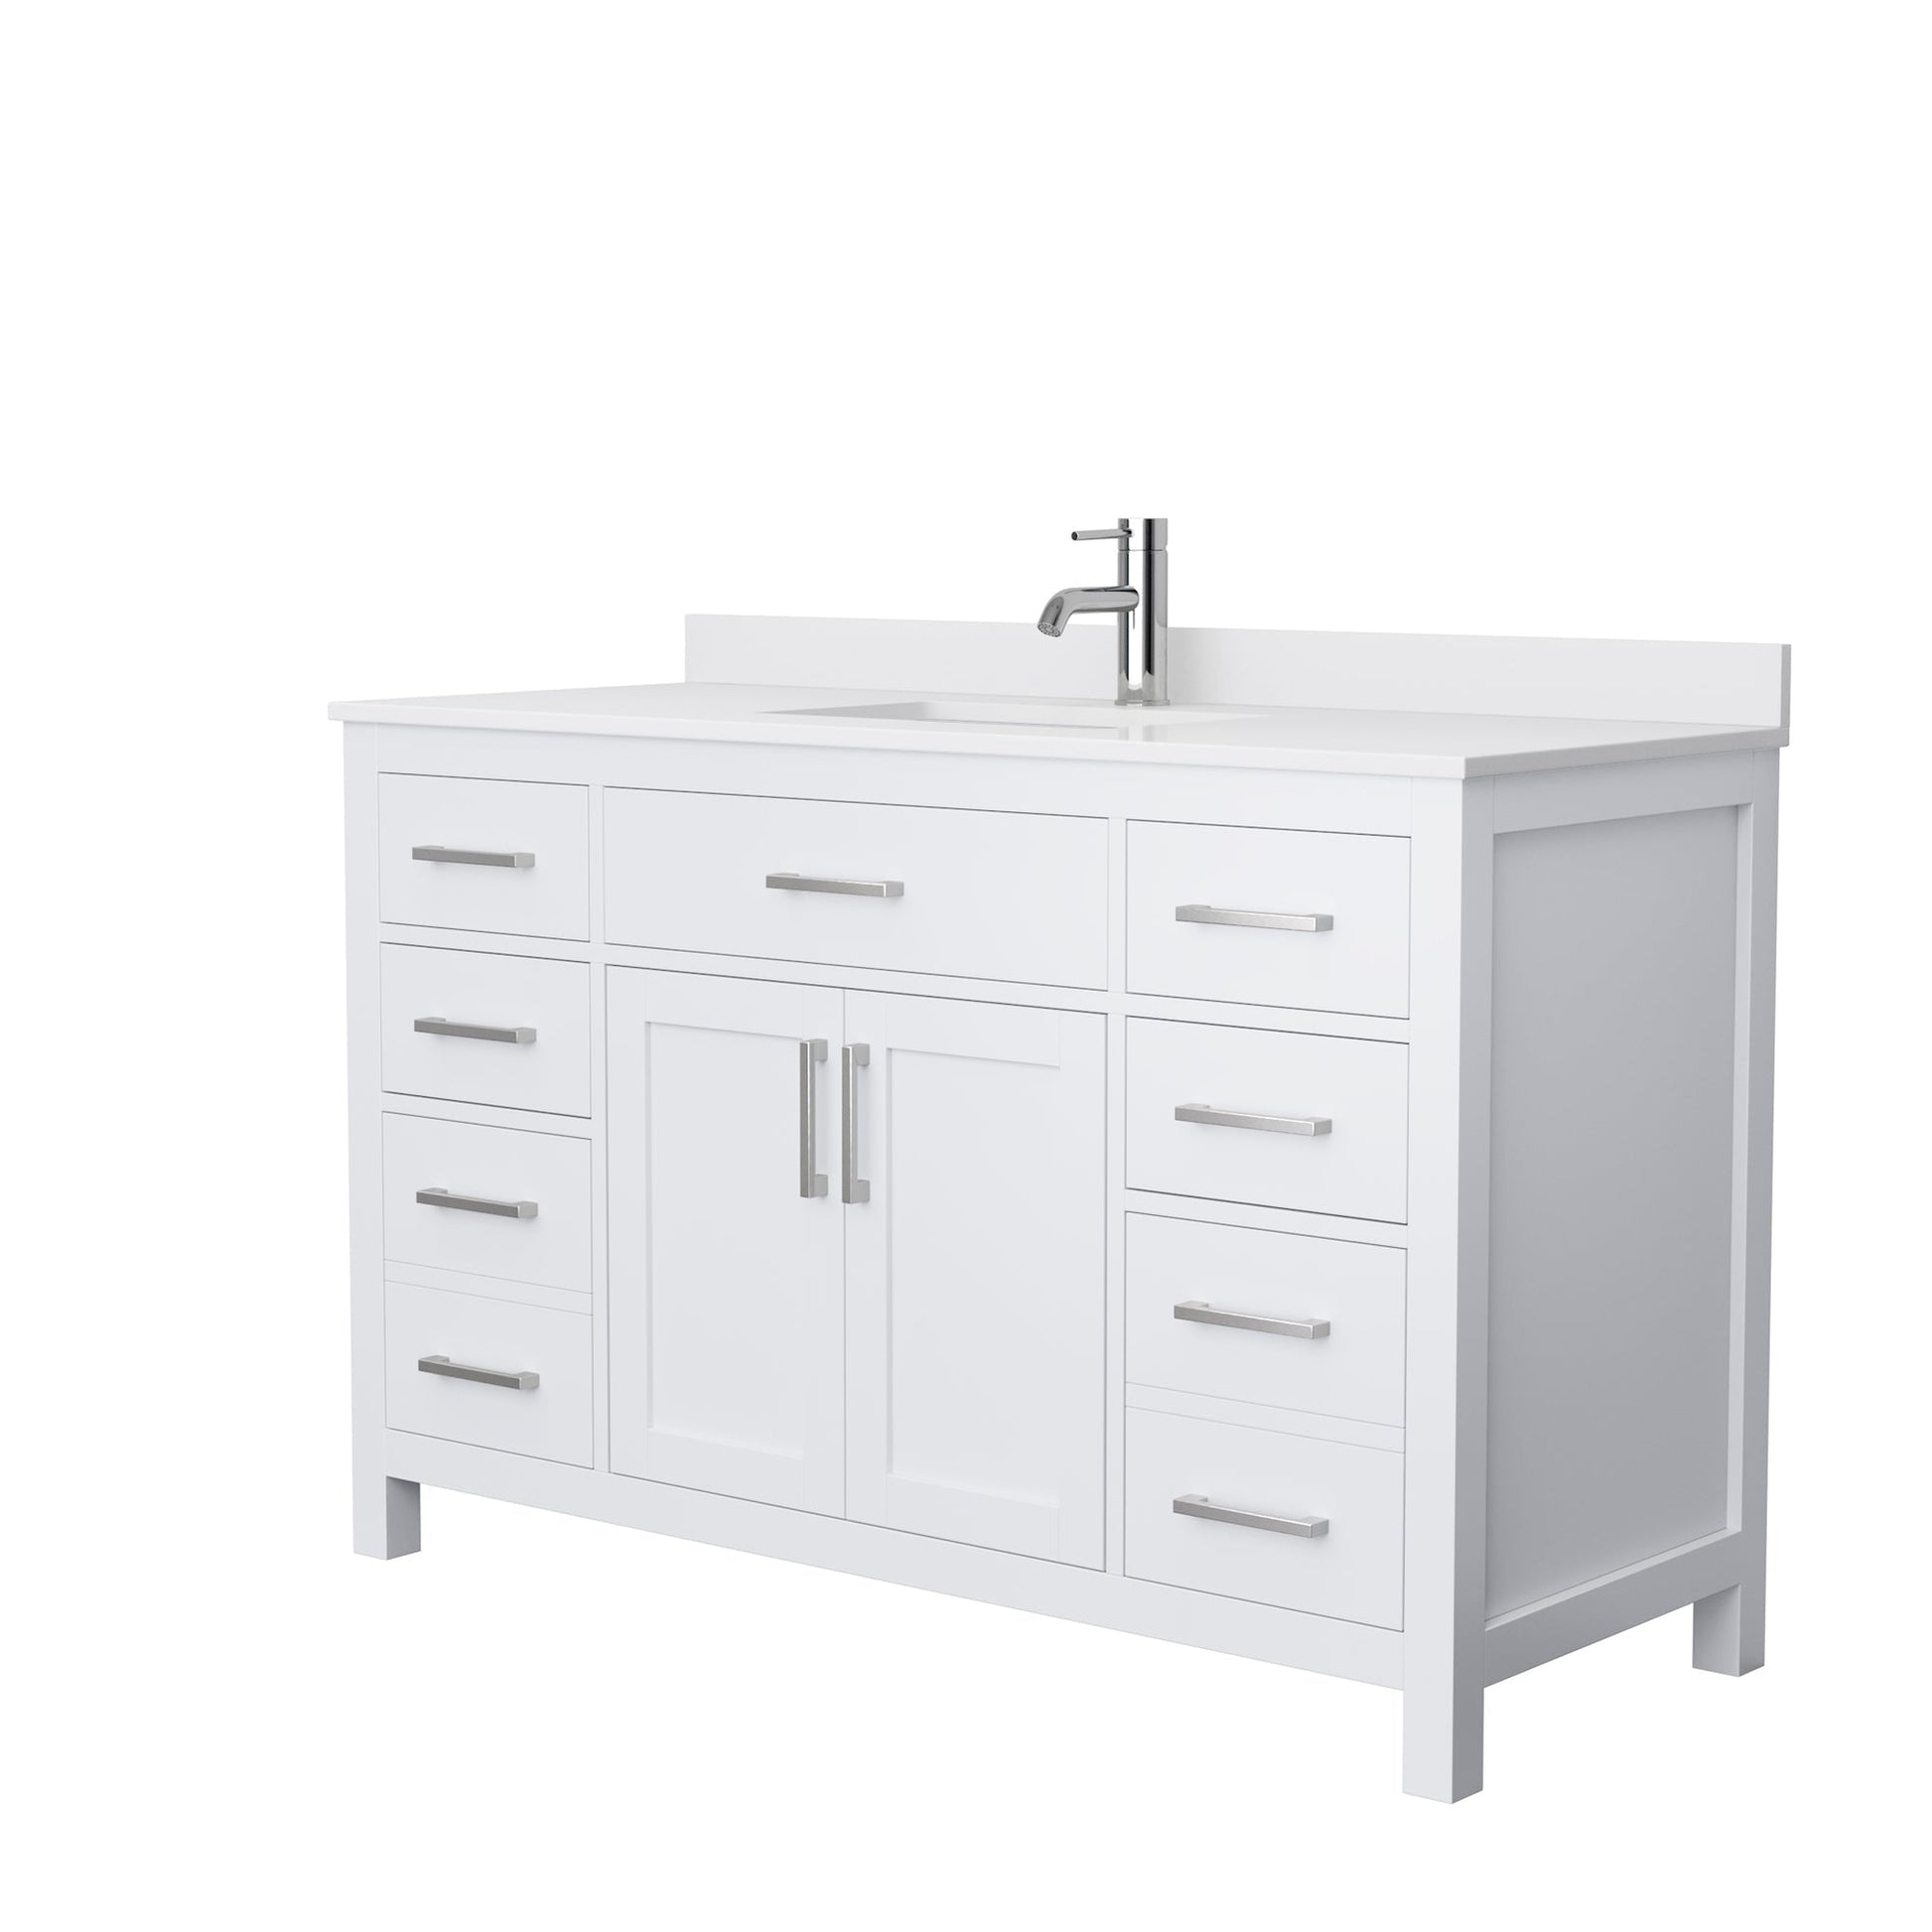 Wyndham Collection Beckett 54" Single Bathroom White Vanity With White Cultured Marble Countertop, Undermount Square Sink And Brushed Nickel Trim